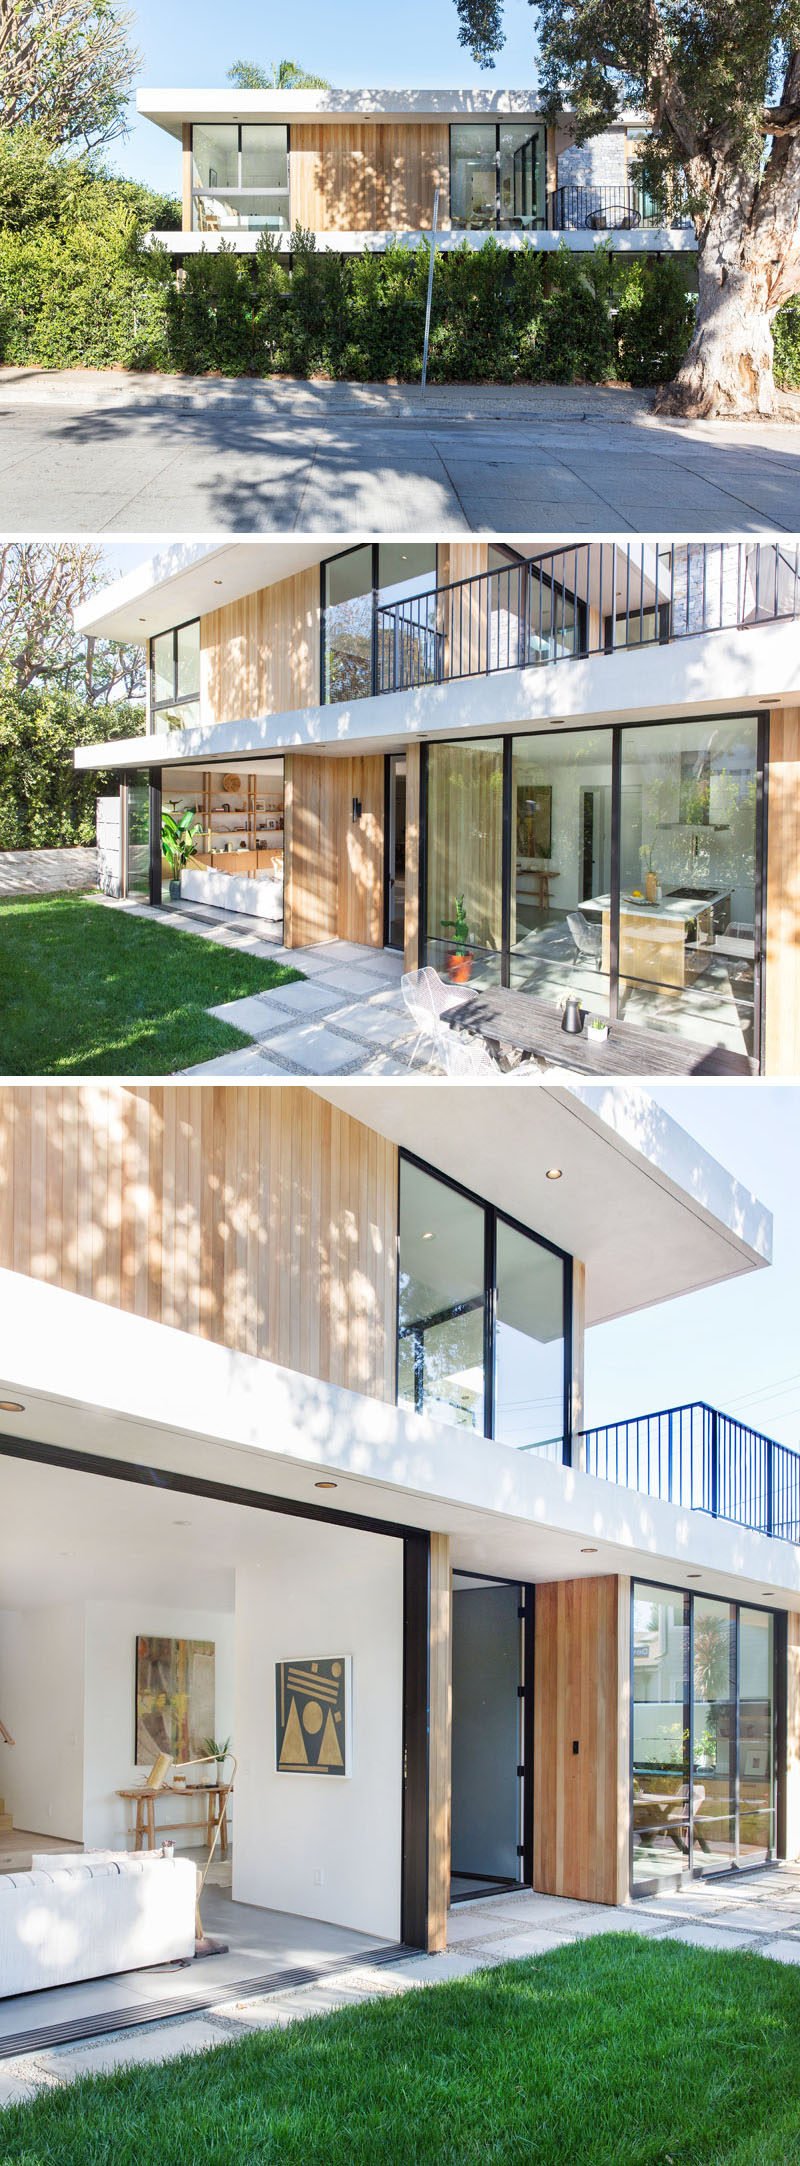 The exterior of this contemporary home is clad in bleached cedar and stucco, with a second story deck that breaks up the massing and relates to the corner at the second level. #ContemporaryHouse #HouseDesign #Architecture